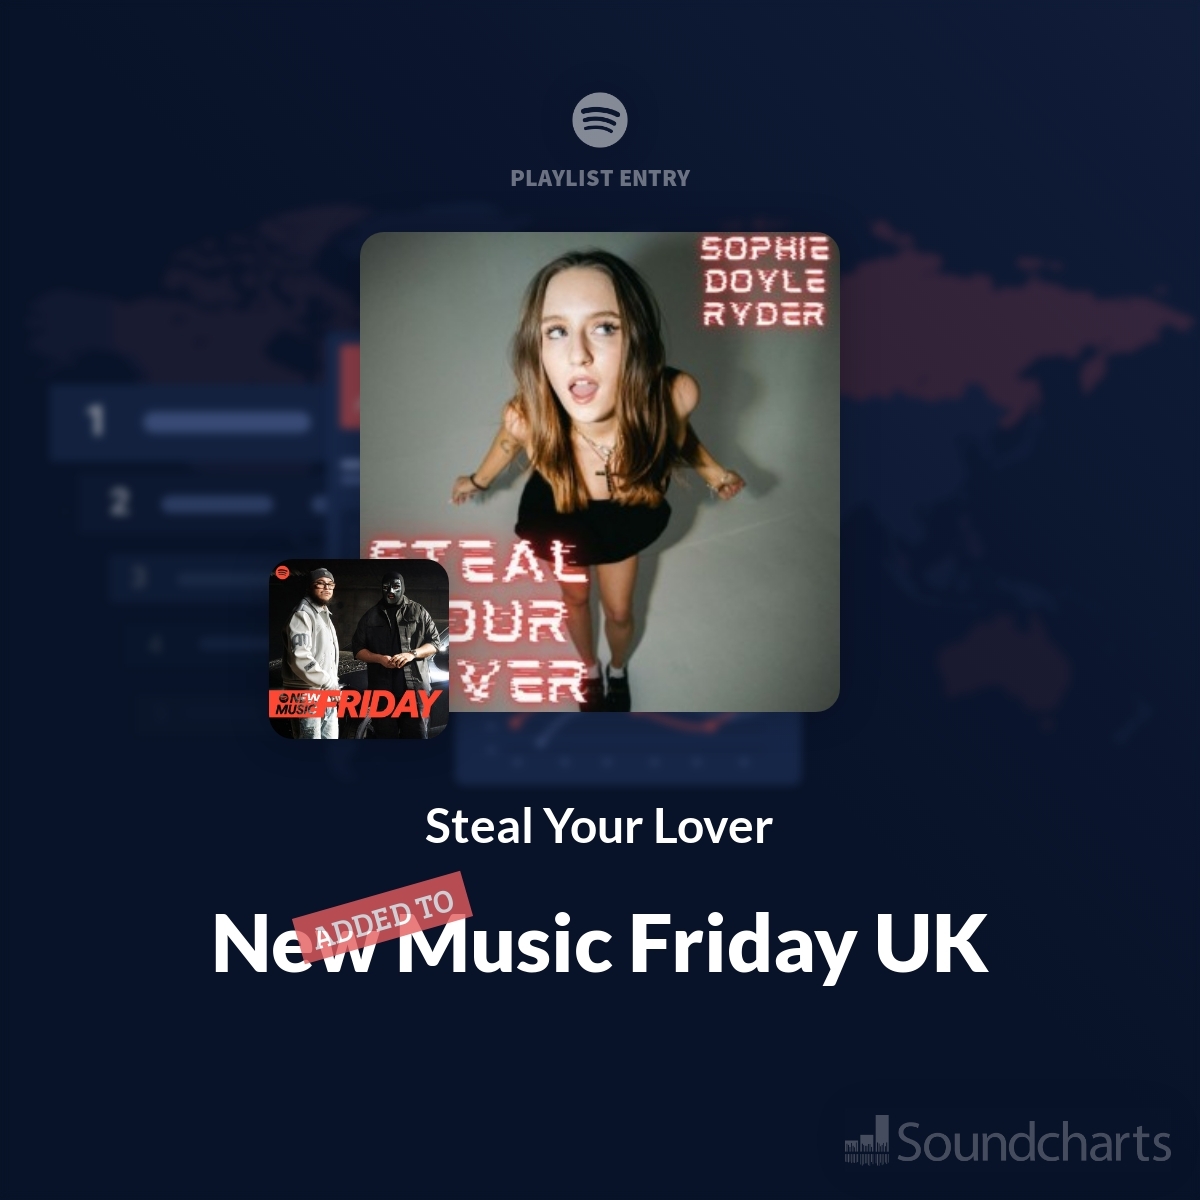 @sophdoyleryder 👋 Hey there! Just wanted to let you know that 'Steal Your Lover' is now being featured on 'New Music Friday UK' playlist on Spotify! 🎧